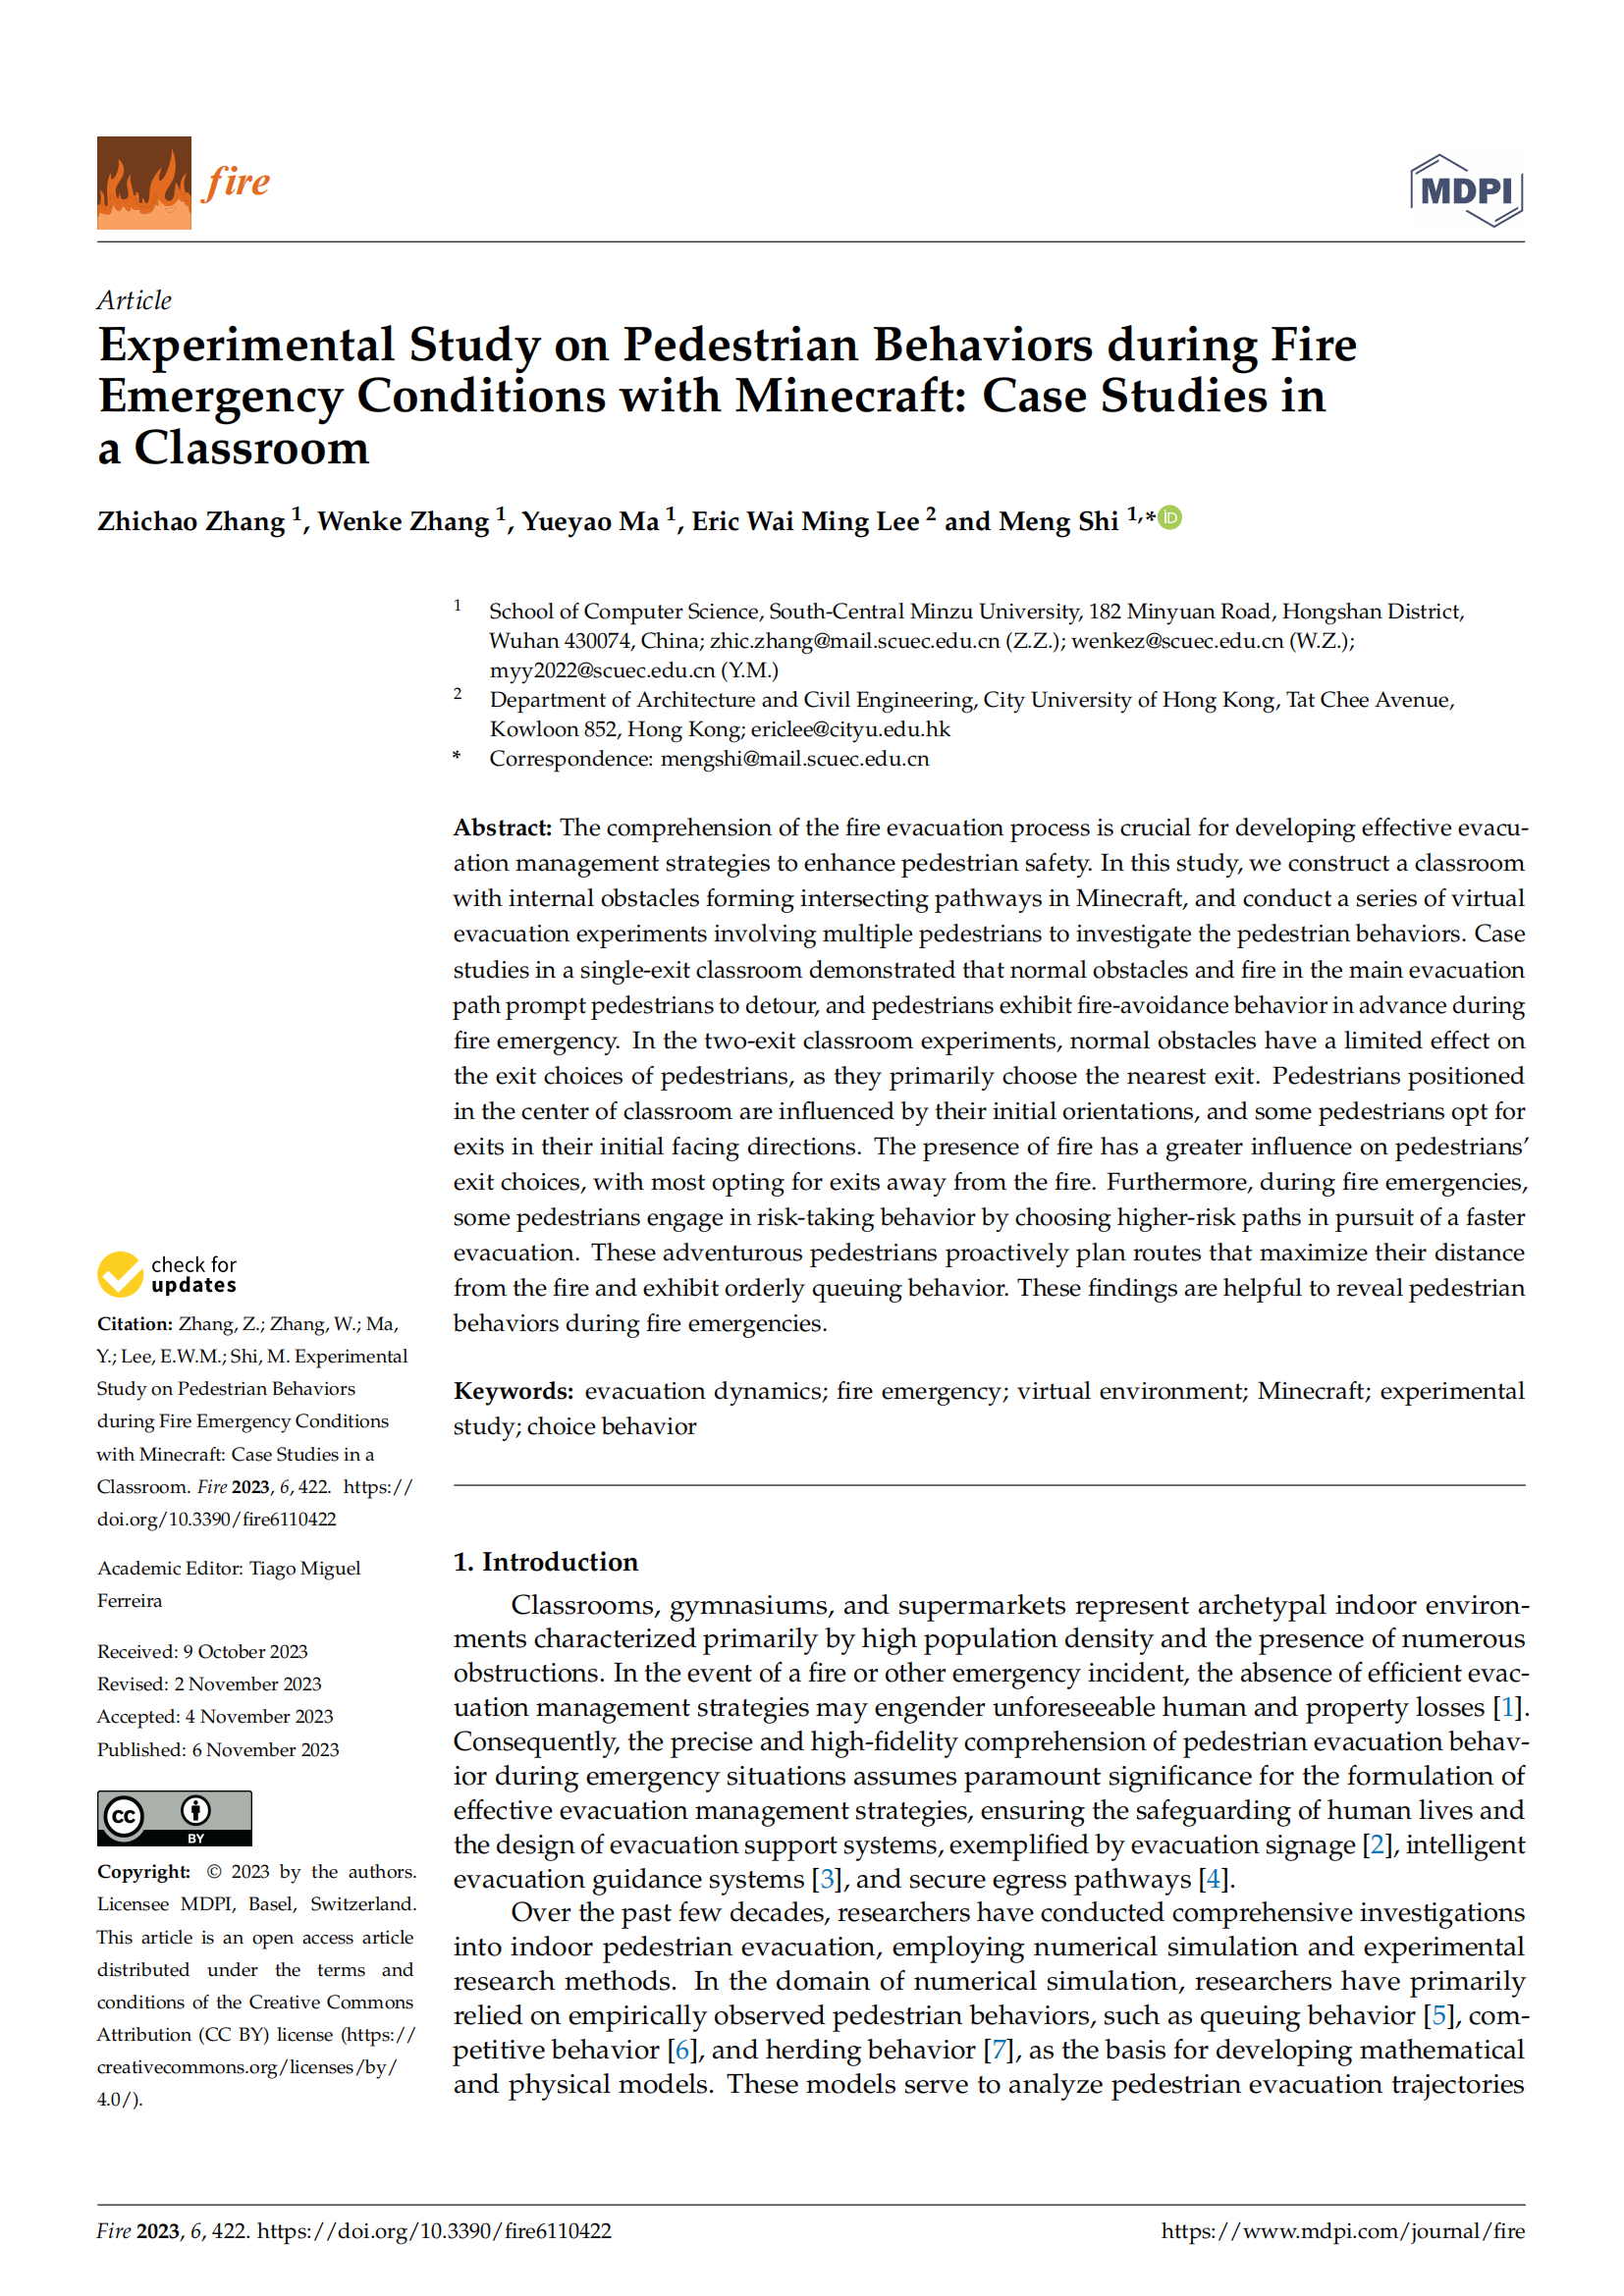 Experimental Study on Pedestrian Behaviors during Fire Emergency Conditions with Minecraft: Case Studies in a Classroom